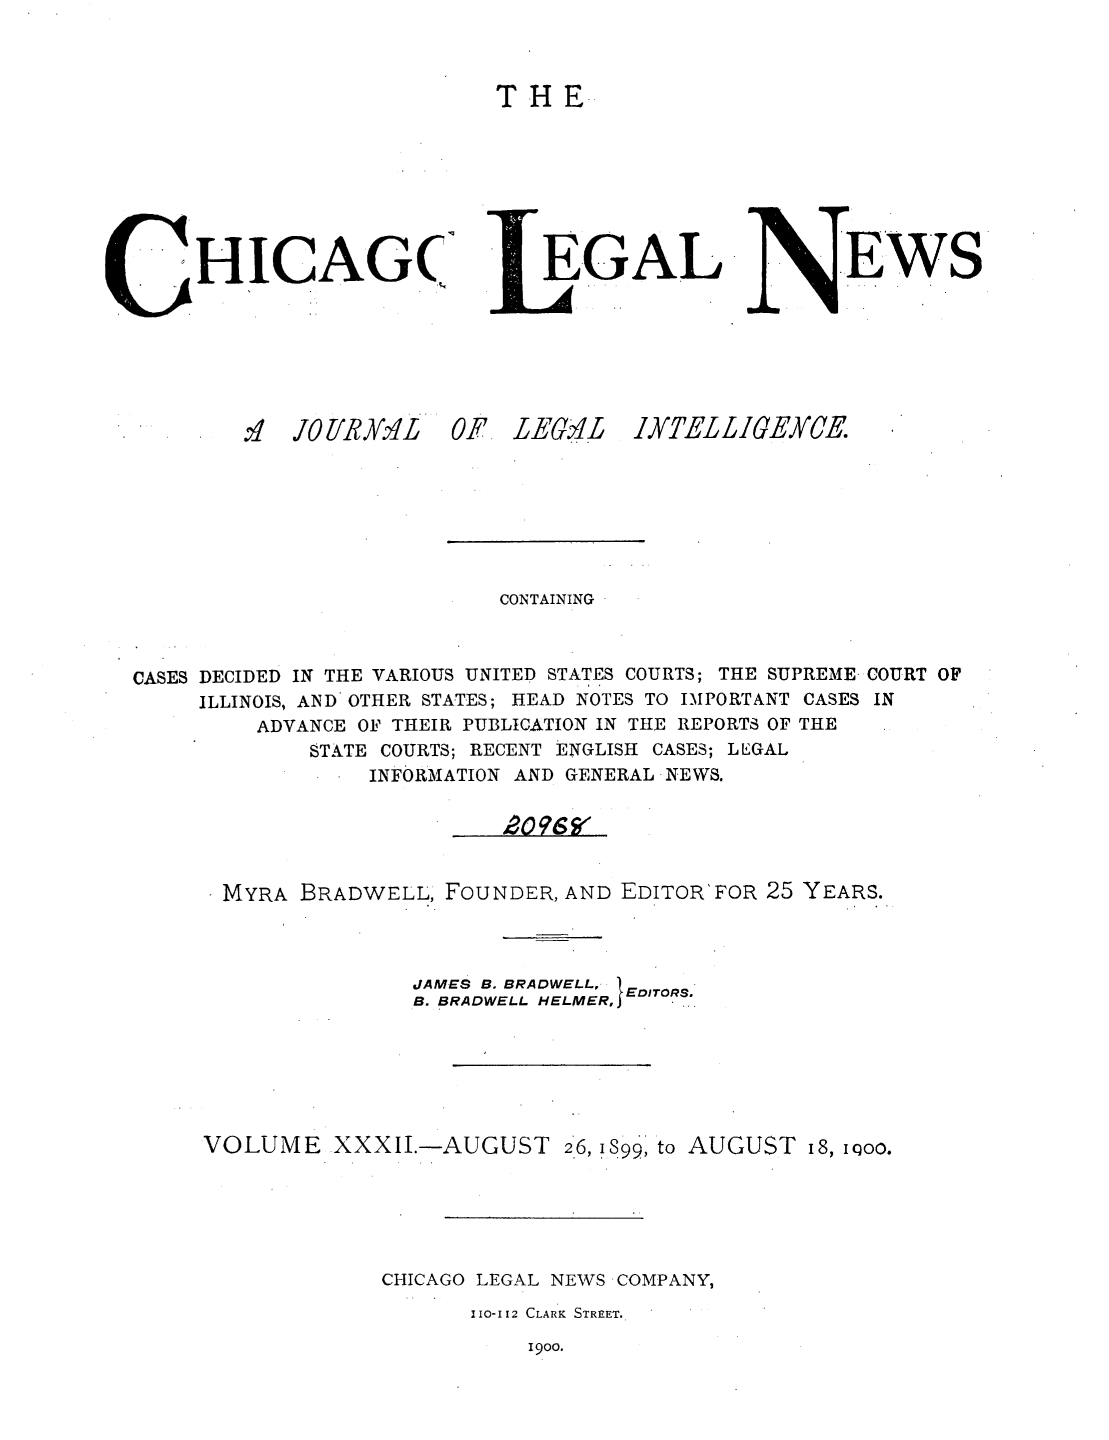 handle is hein.journals/chiclene32 and id is 1 raw text is: T H EHICAG(.N'  JO /iRY.'EGALF LE.,4LEWSCONTAININGCASES DECIDED IN THE VARIOUS UNITED STATES COURTS; THE SUPREME- COURT OFILLINOIS, AND OTHER STATES; HEAD NOTES TO IMPORTANT CASES INADVANCE OF THEIR PUBLICATION IN THE REPORTS OF THESTATE COURTS; RECENT ENGLISH CASES; LLGALINFORMATION AND GENERAL NEWS.MYRA BRADWELL, FOUNDER, AND EDITOR'FOR 25 YEARS.JAMES B. BRADWELL,B. BRADWELL HELMEREVOLUME XXXII.-AUGUST 2*6, 1899, to AUGUST 18, 1Qoo.CHICAGO LEGAL NEWS COMPANY,I I0-I[2 CLARK STREET.1900.IYTEL LIGEYCE.